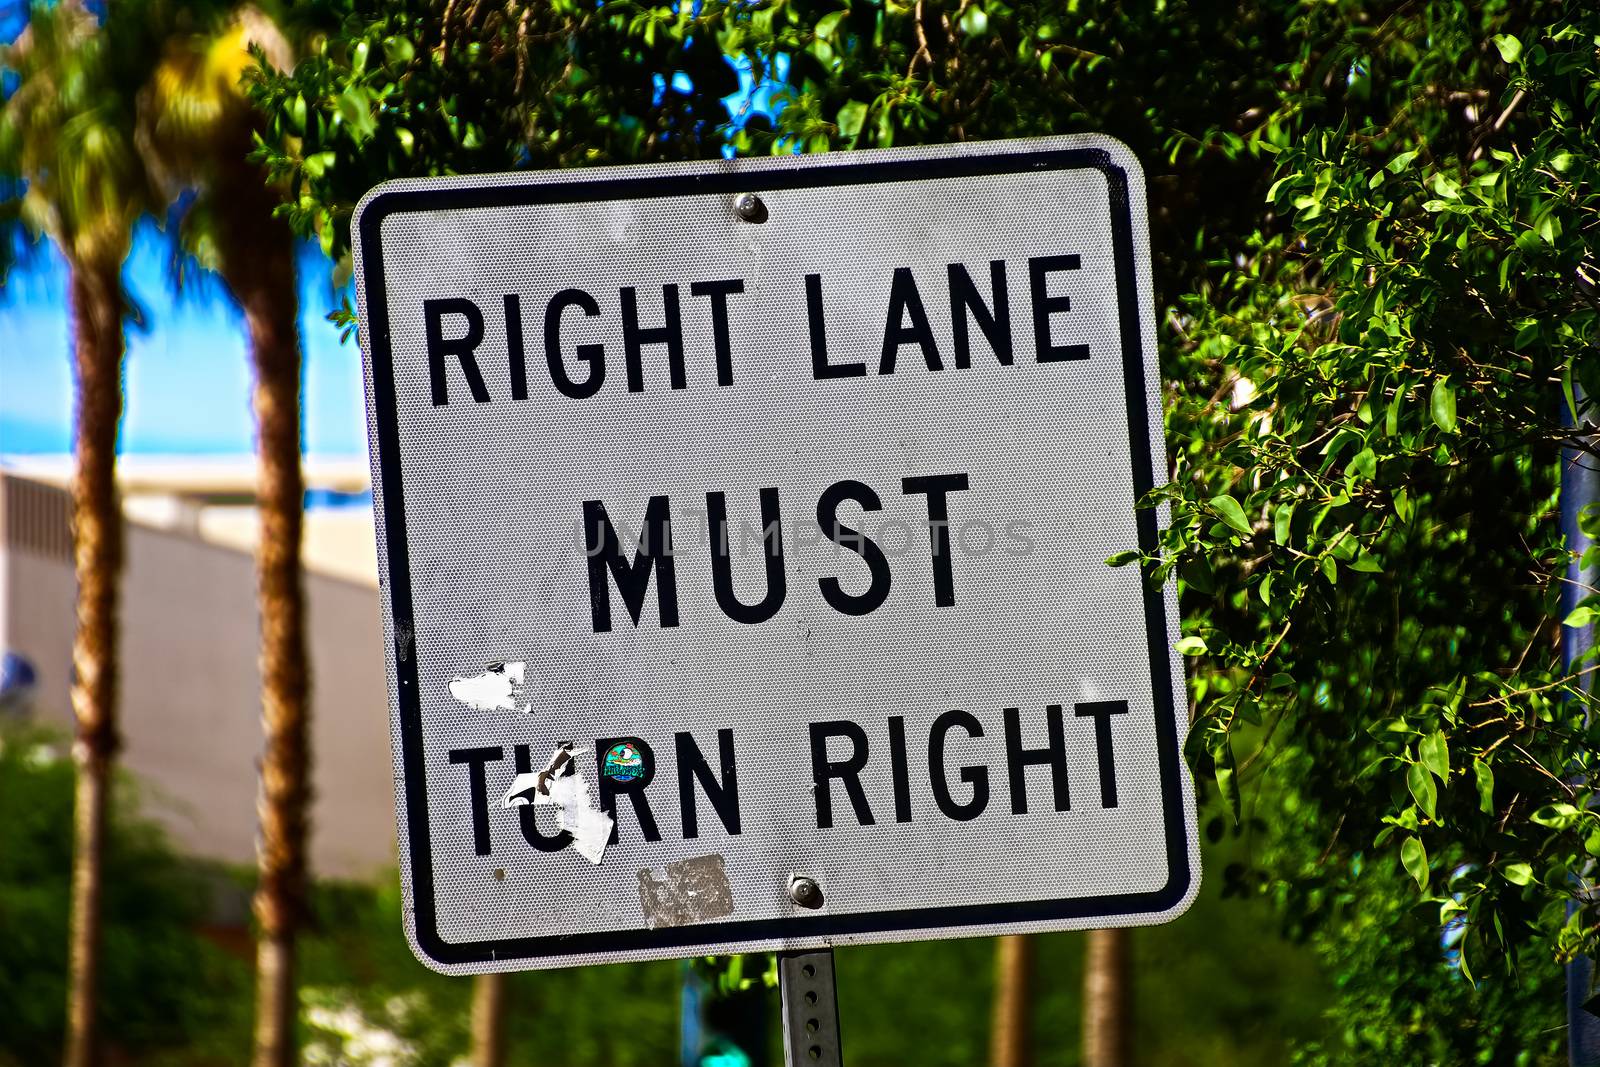 Sign of Right lane must turn right.Close up on a "Right Lane Must Turn Right" at an intersection, in a transportation background.Signpost in public street, "Right Lane Must Turn Right"